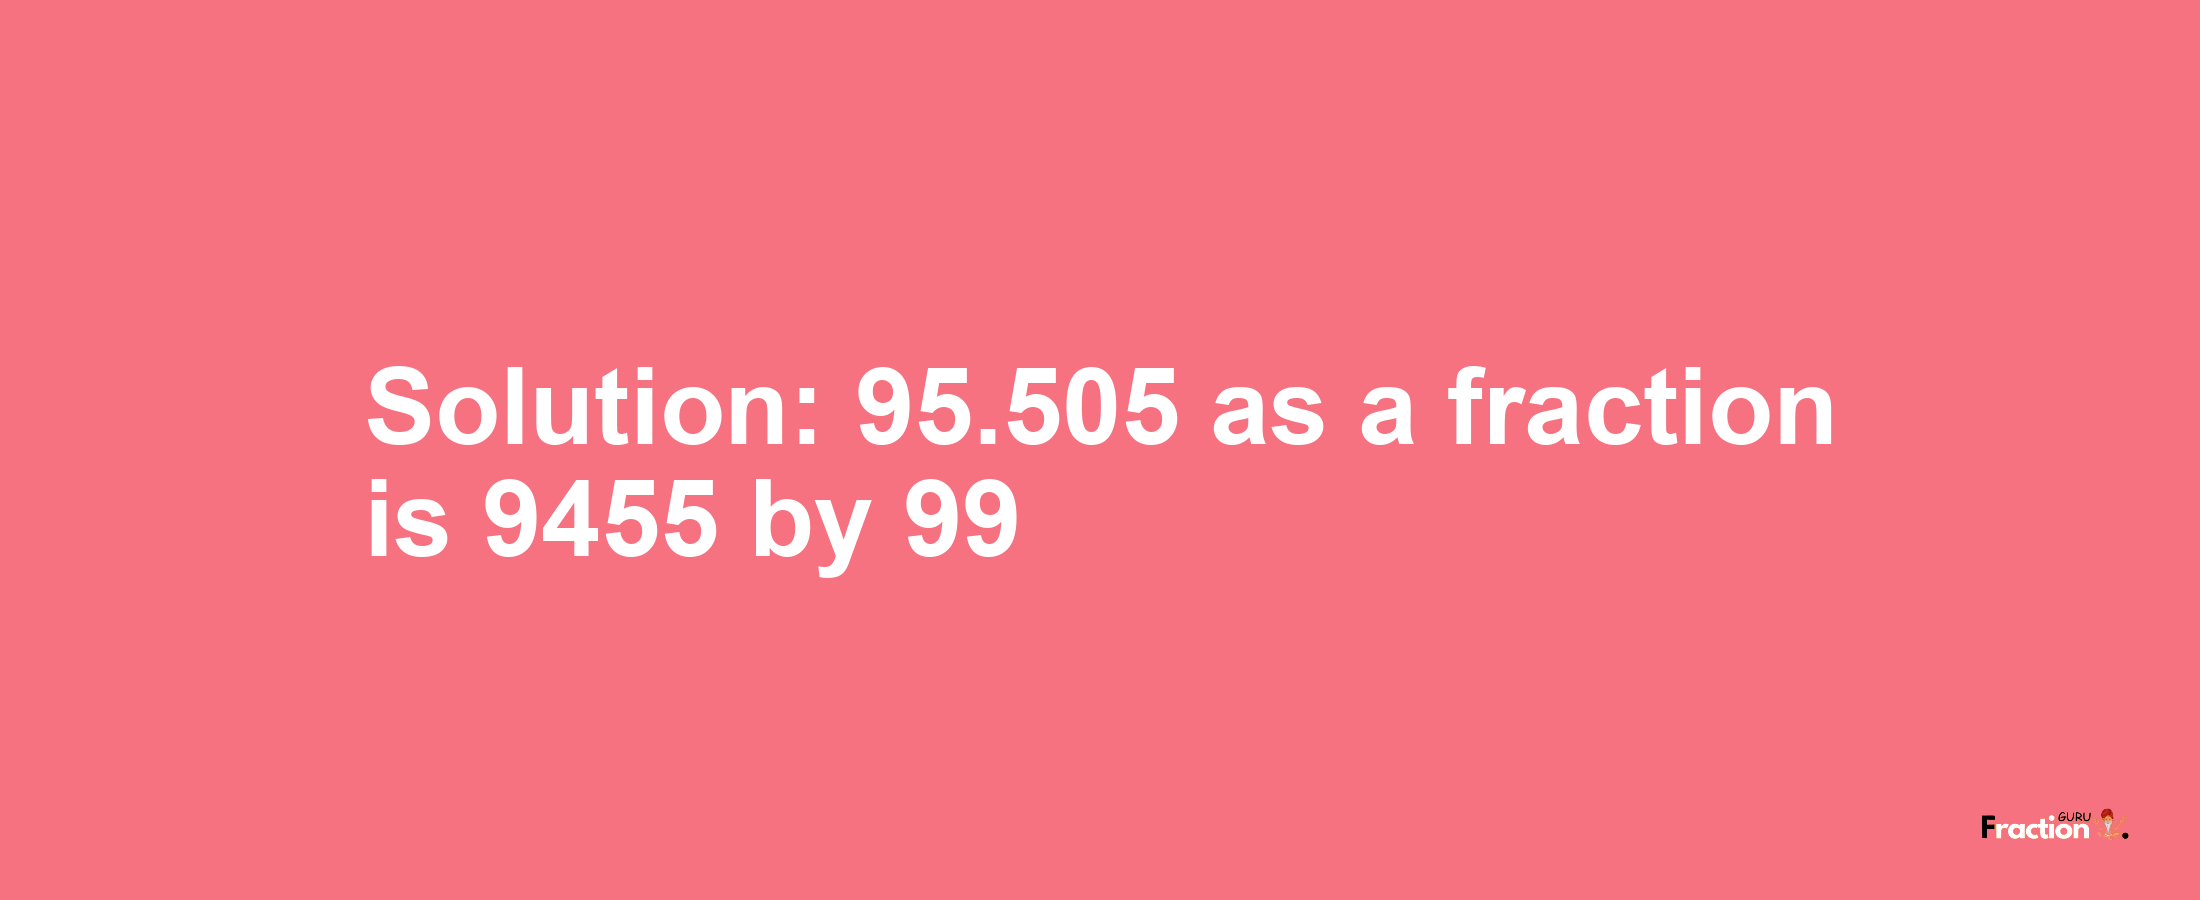 Solution:95.505 as a fraction is 9455/99